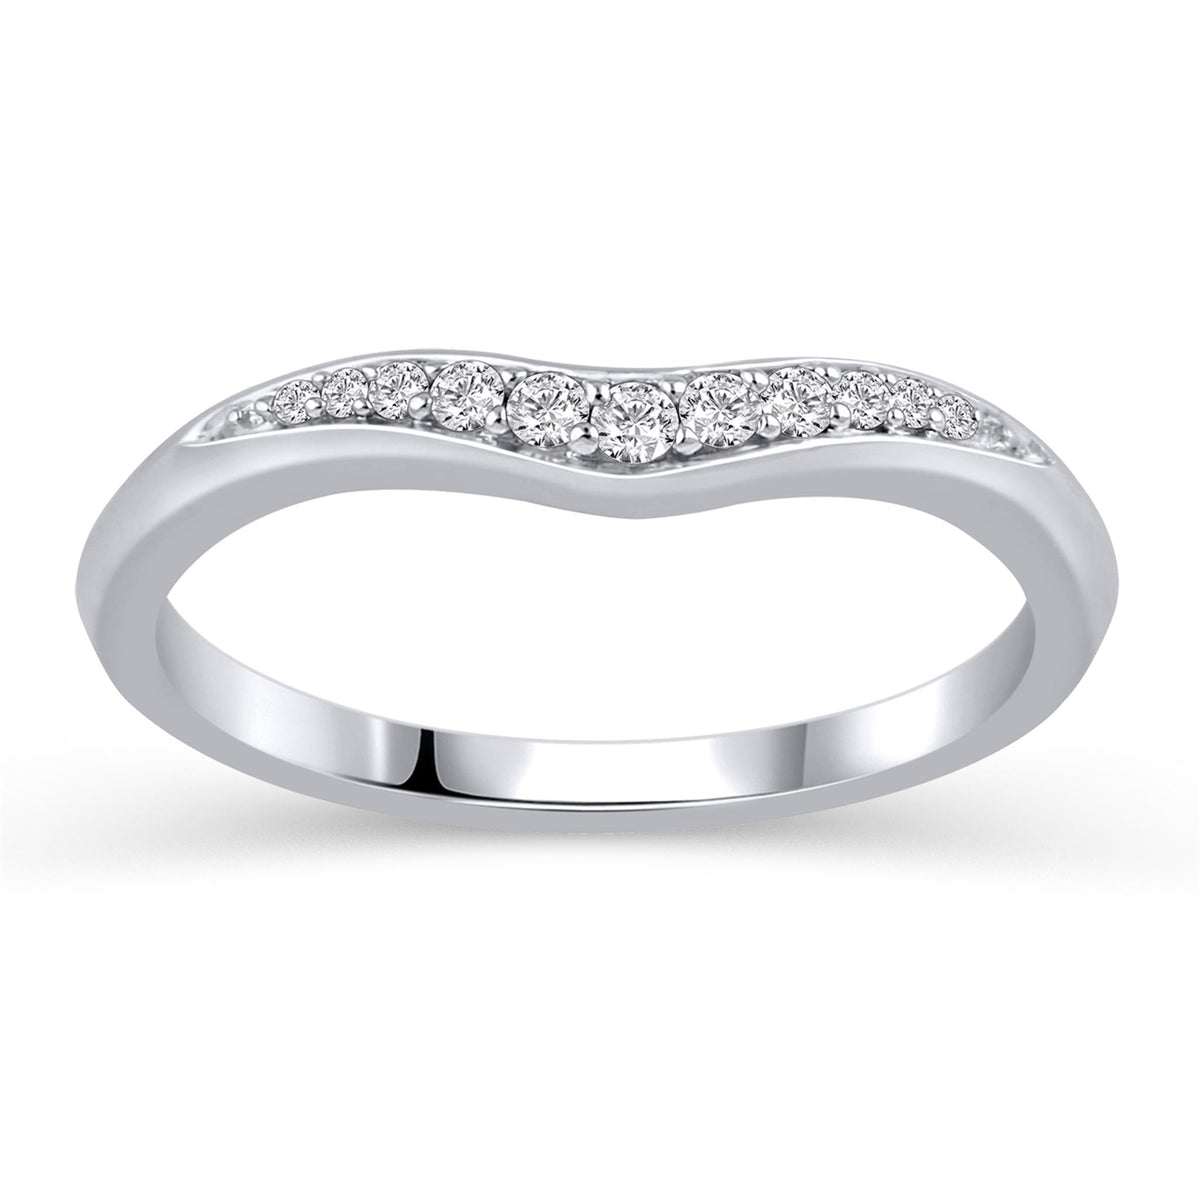 14Kt White Gold Curved Wedding Ring With 0.12cttw Natural Diamonds